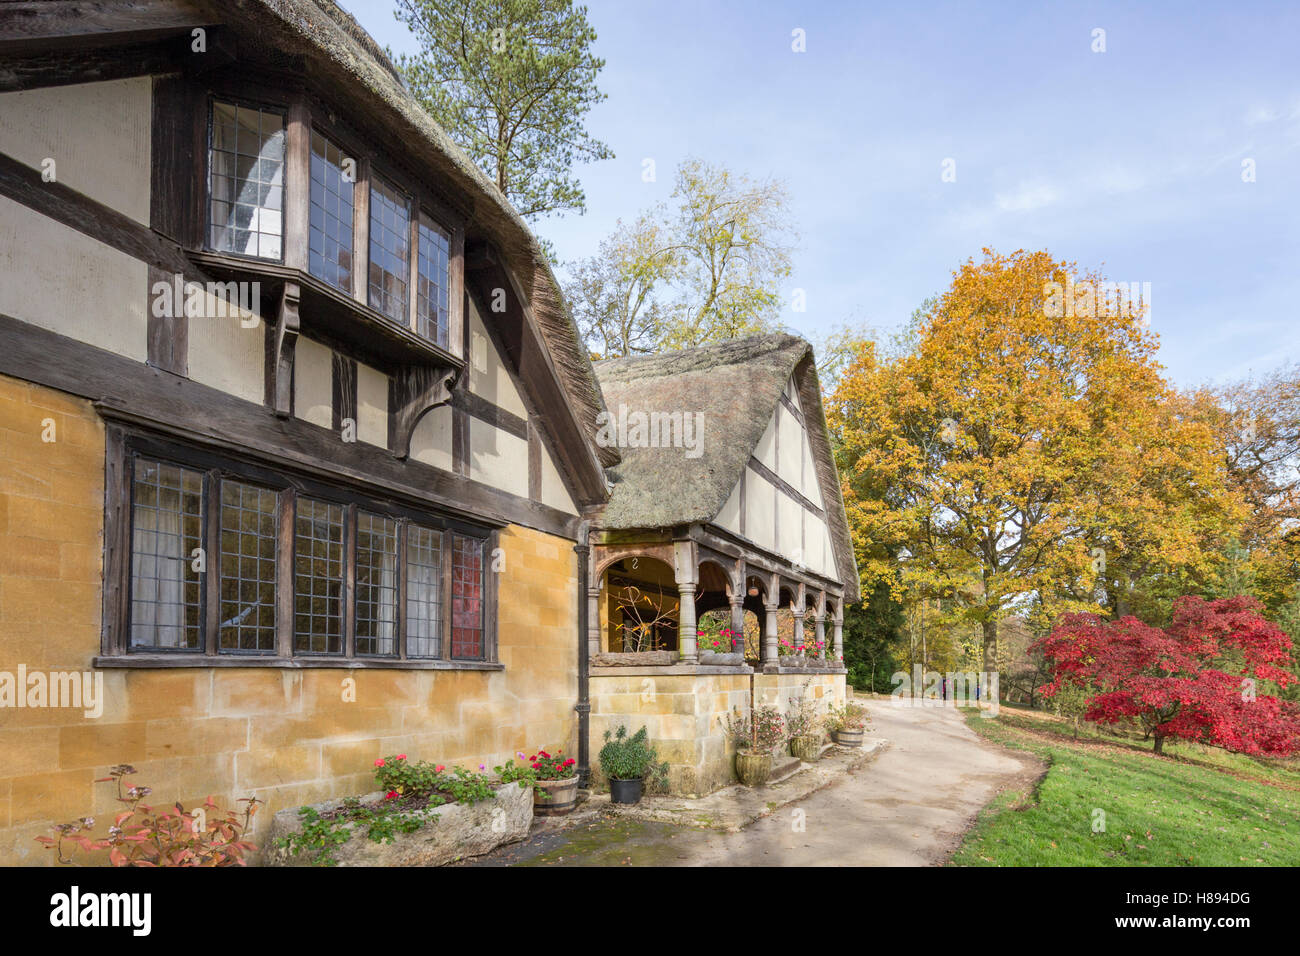 Attractive cottage at Batsford Arboretum in autumn, Gloucestershire, England, UK Stock Photo